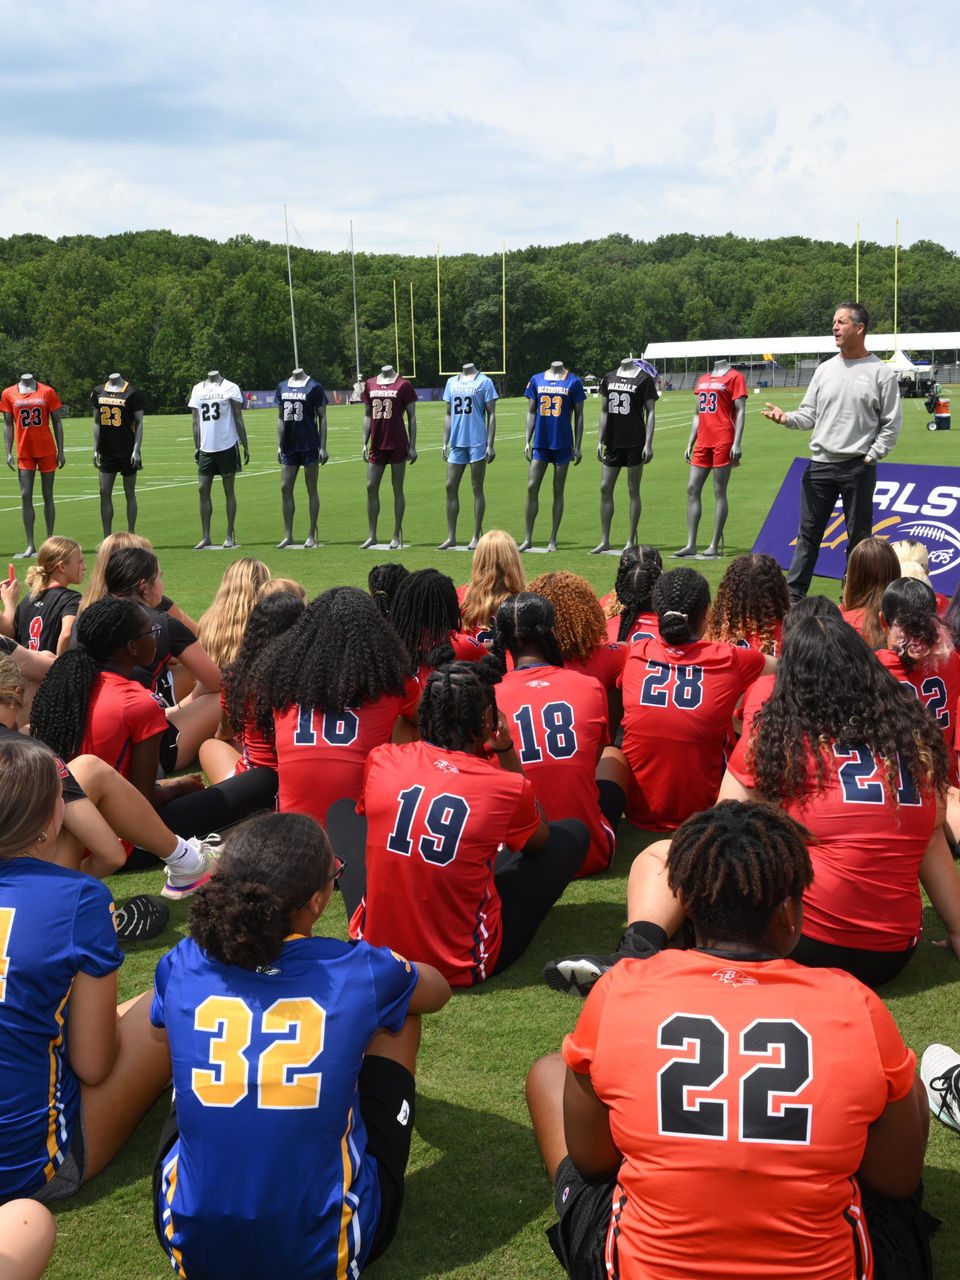 Baltimore Ravens & Under Armour Unveil Custom Uniforms for Inaugural Season of Girls' Flag Football with Frederick County Public Schools